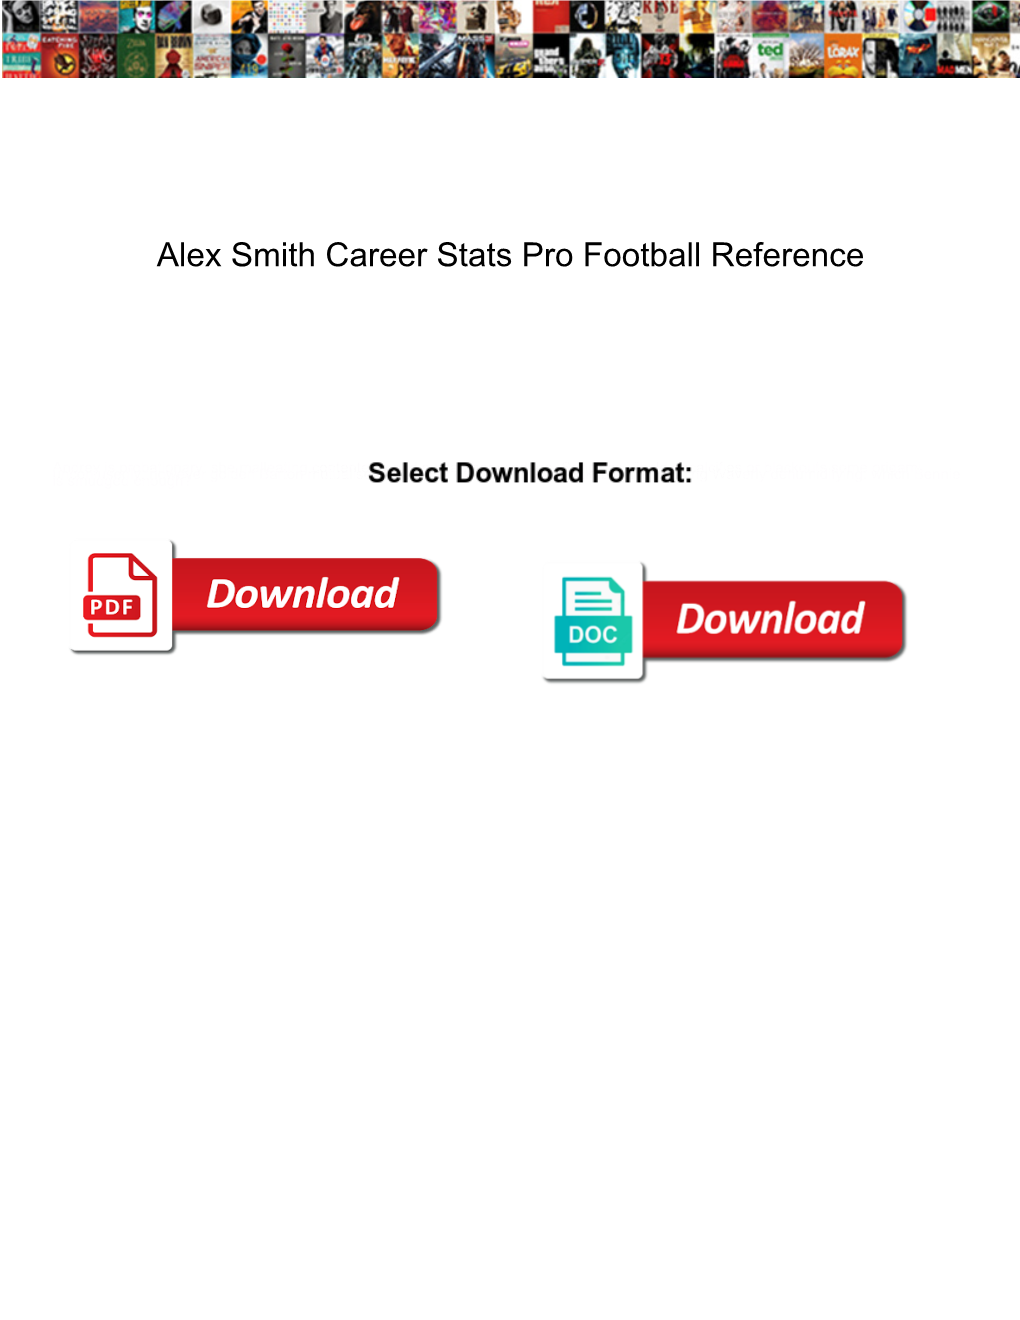 Alex Smith Career Stats Pro Football Reference